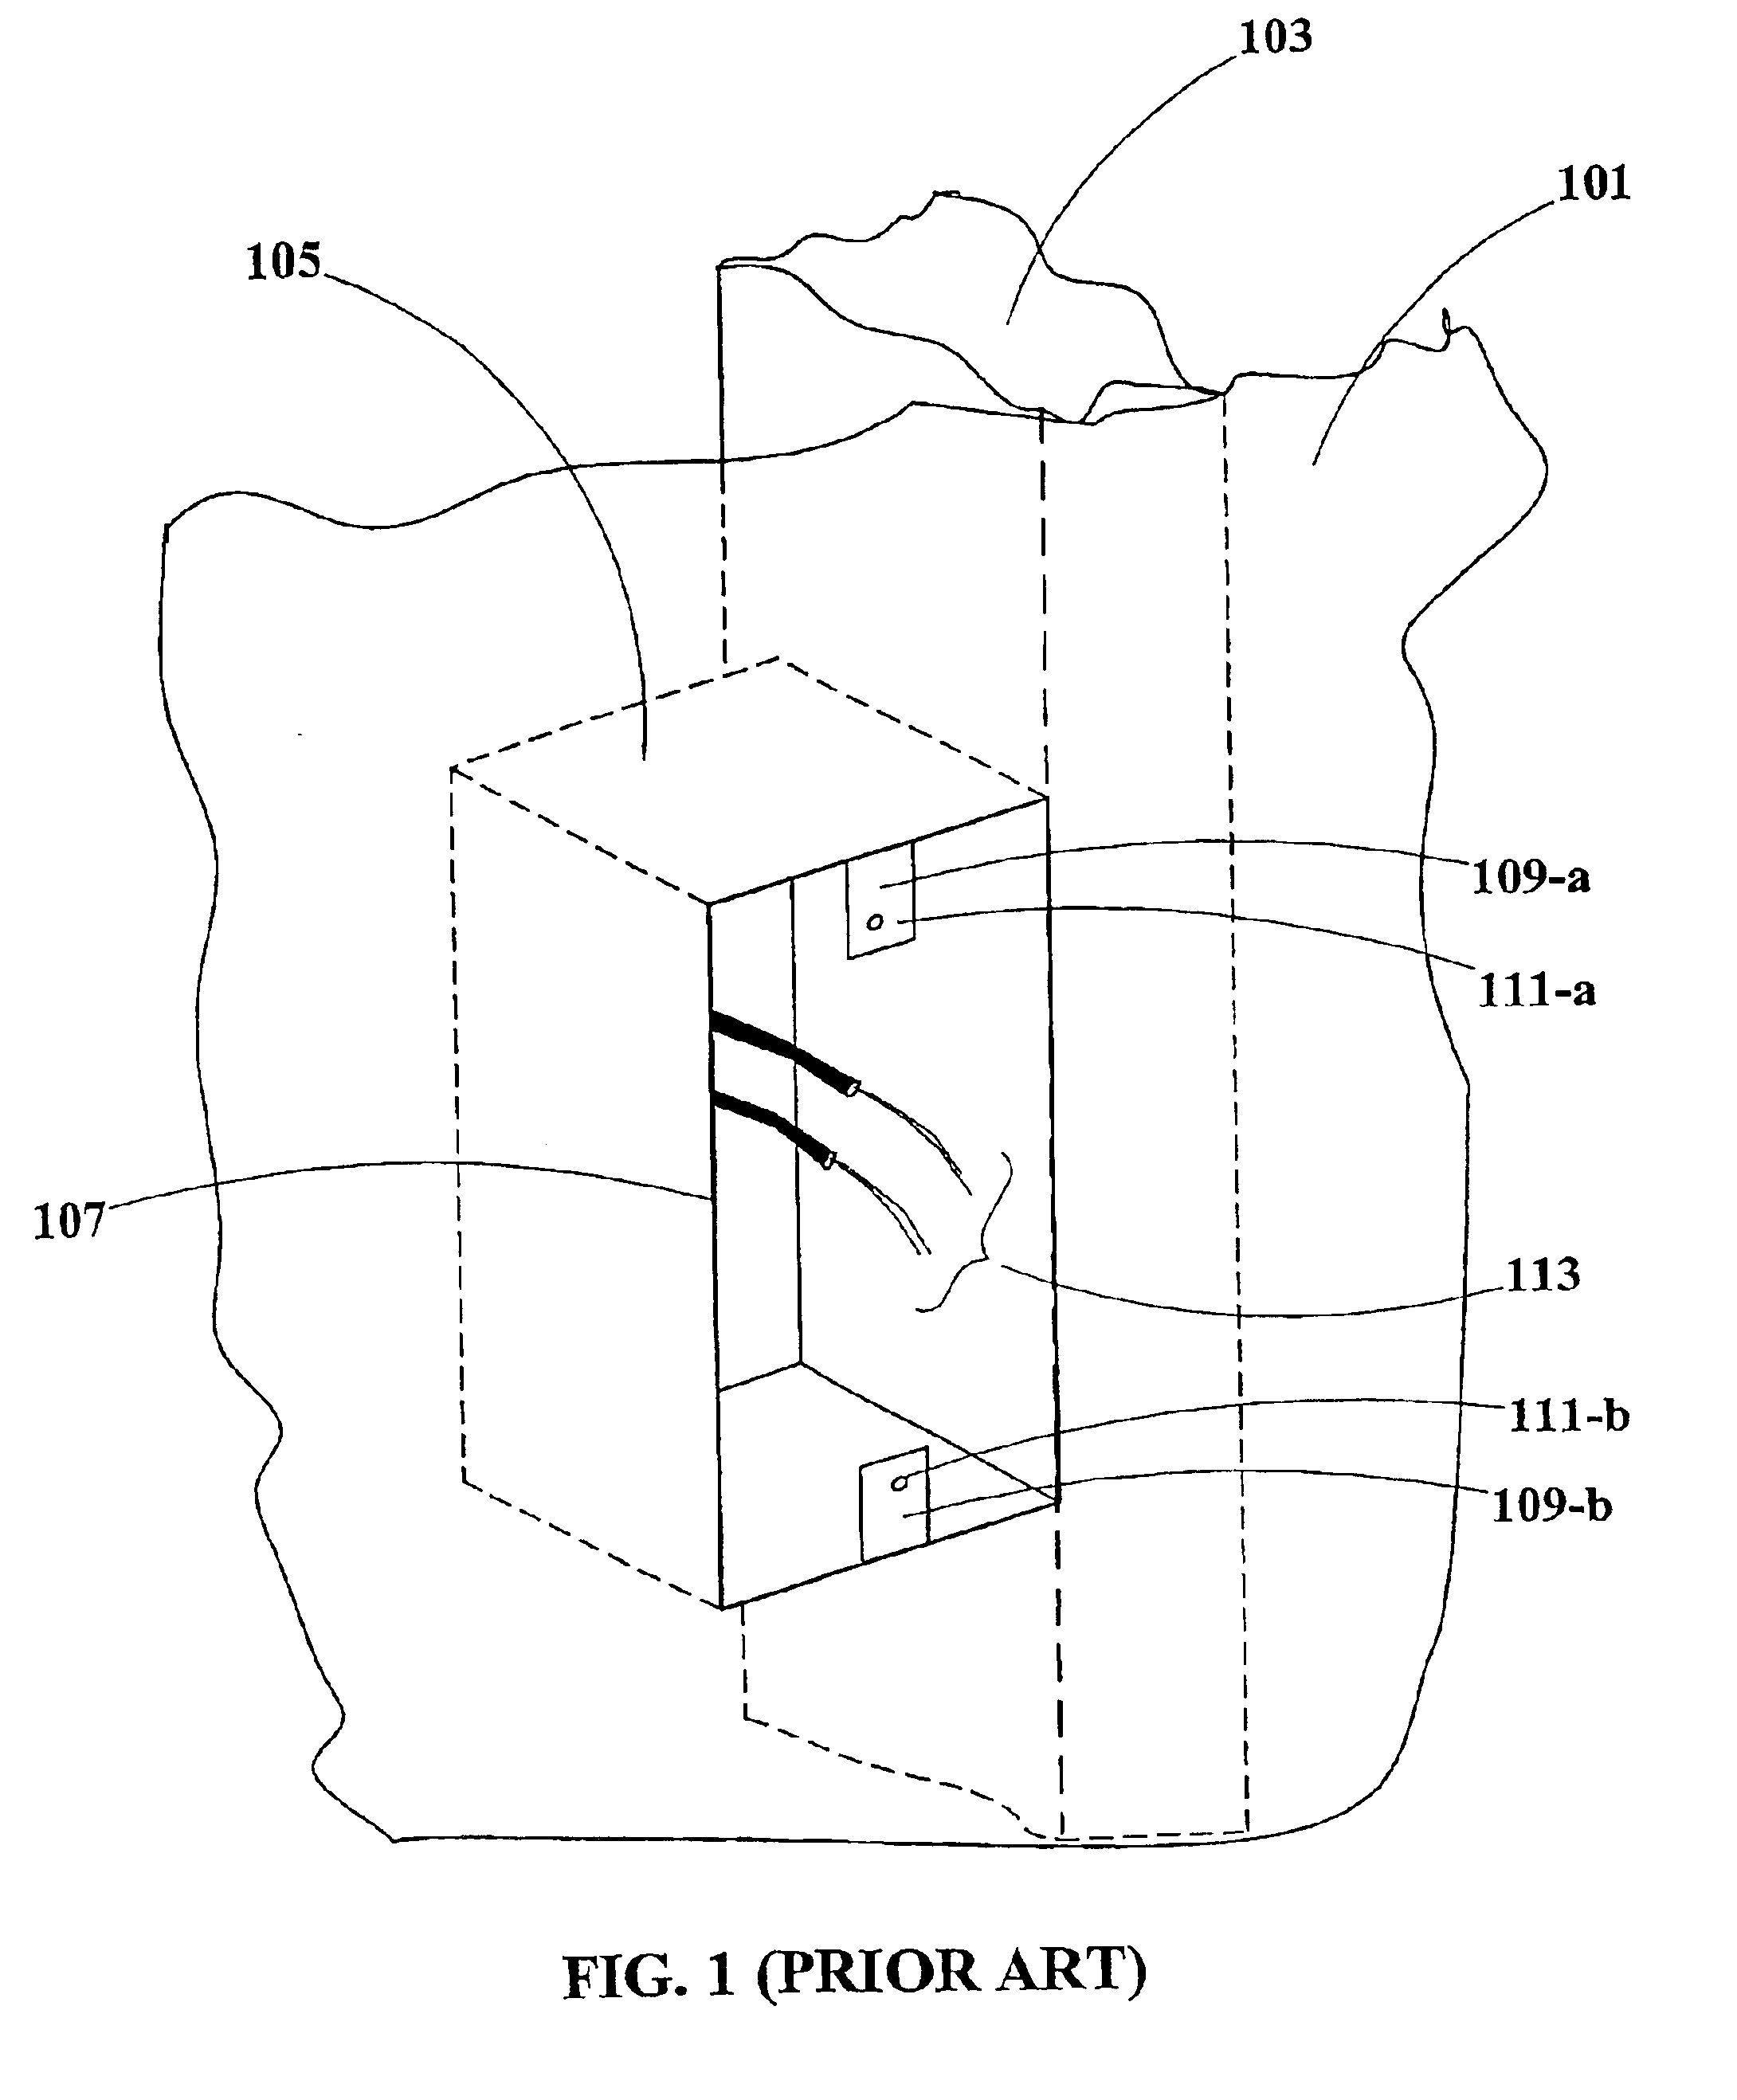 Adapter for mounting a faceplate of a first style on to an electrical outlet cavity of a second style